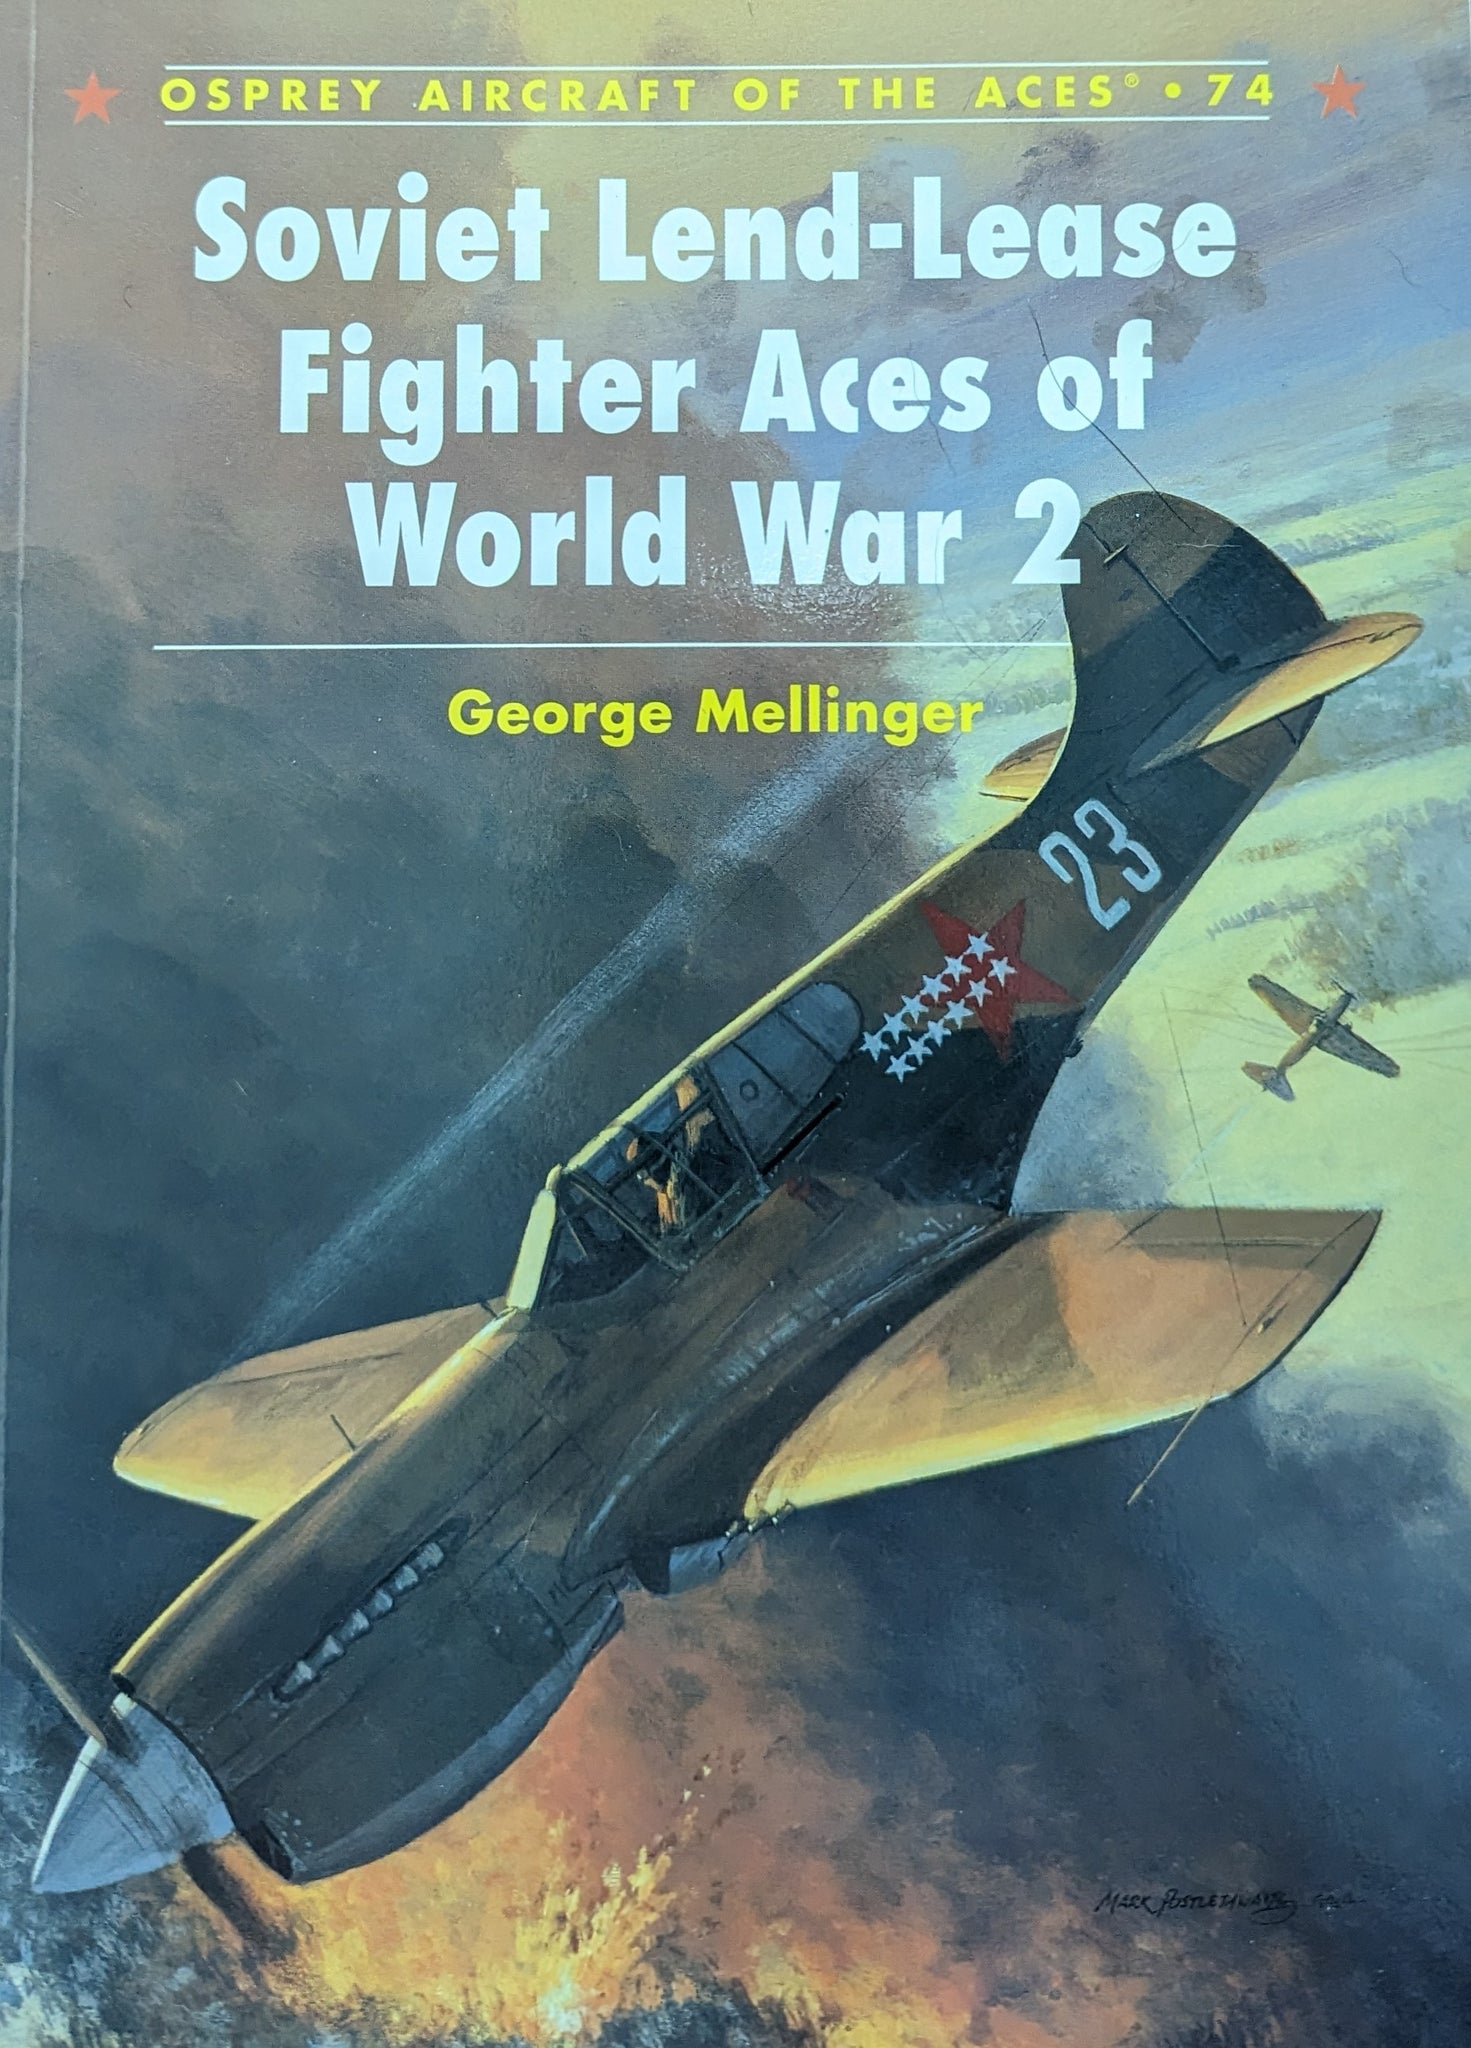 SOVIET LEND-LEASE FIGHTER ACES OF WORLD WAR 2 (Osprey Aircraft of the Aces No 74)